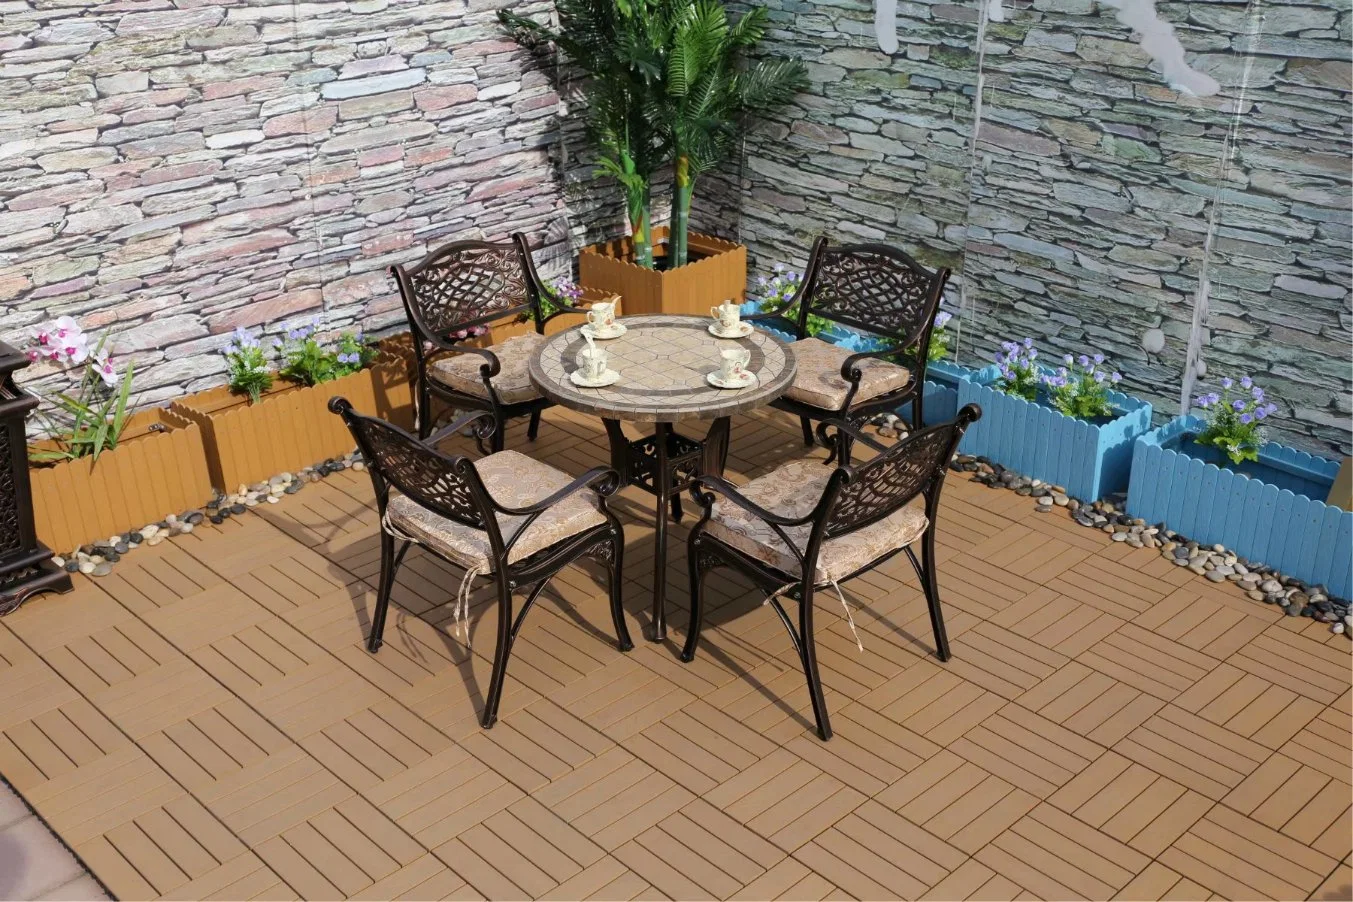 Corrosion Resistant Cast Aluminum Frame Outdoor Garden and Patio Furniture Set Dining Garden Waterproof Chairs